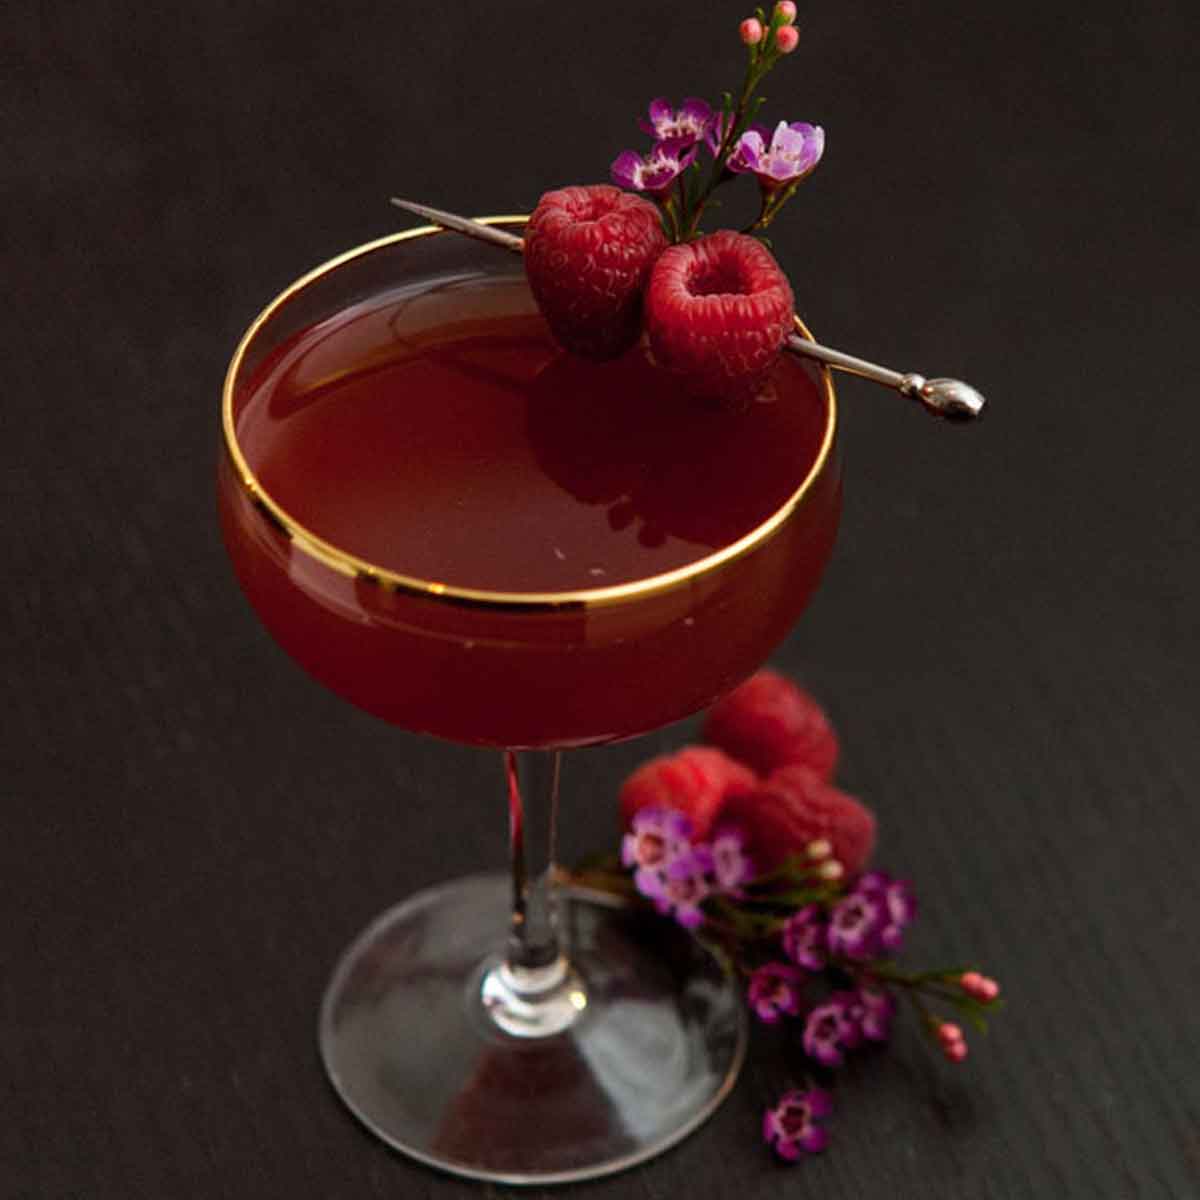 A cocktail on a dark table garnished with raspberries and small flowers, with a few raspberries and flowers at its base.